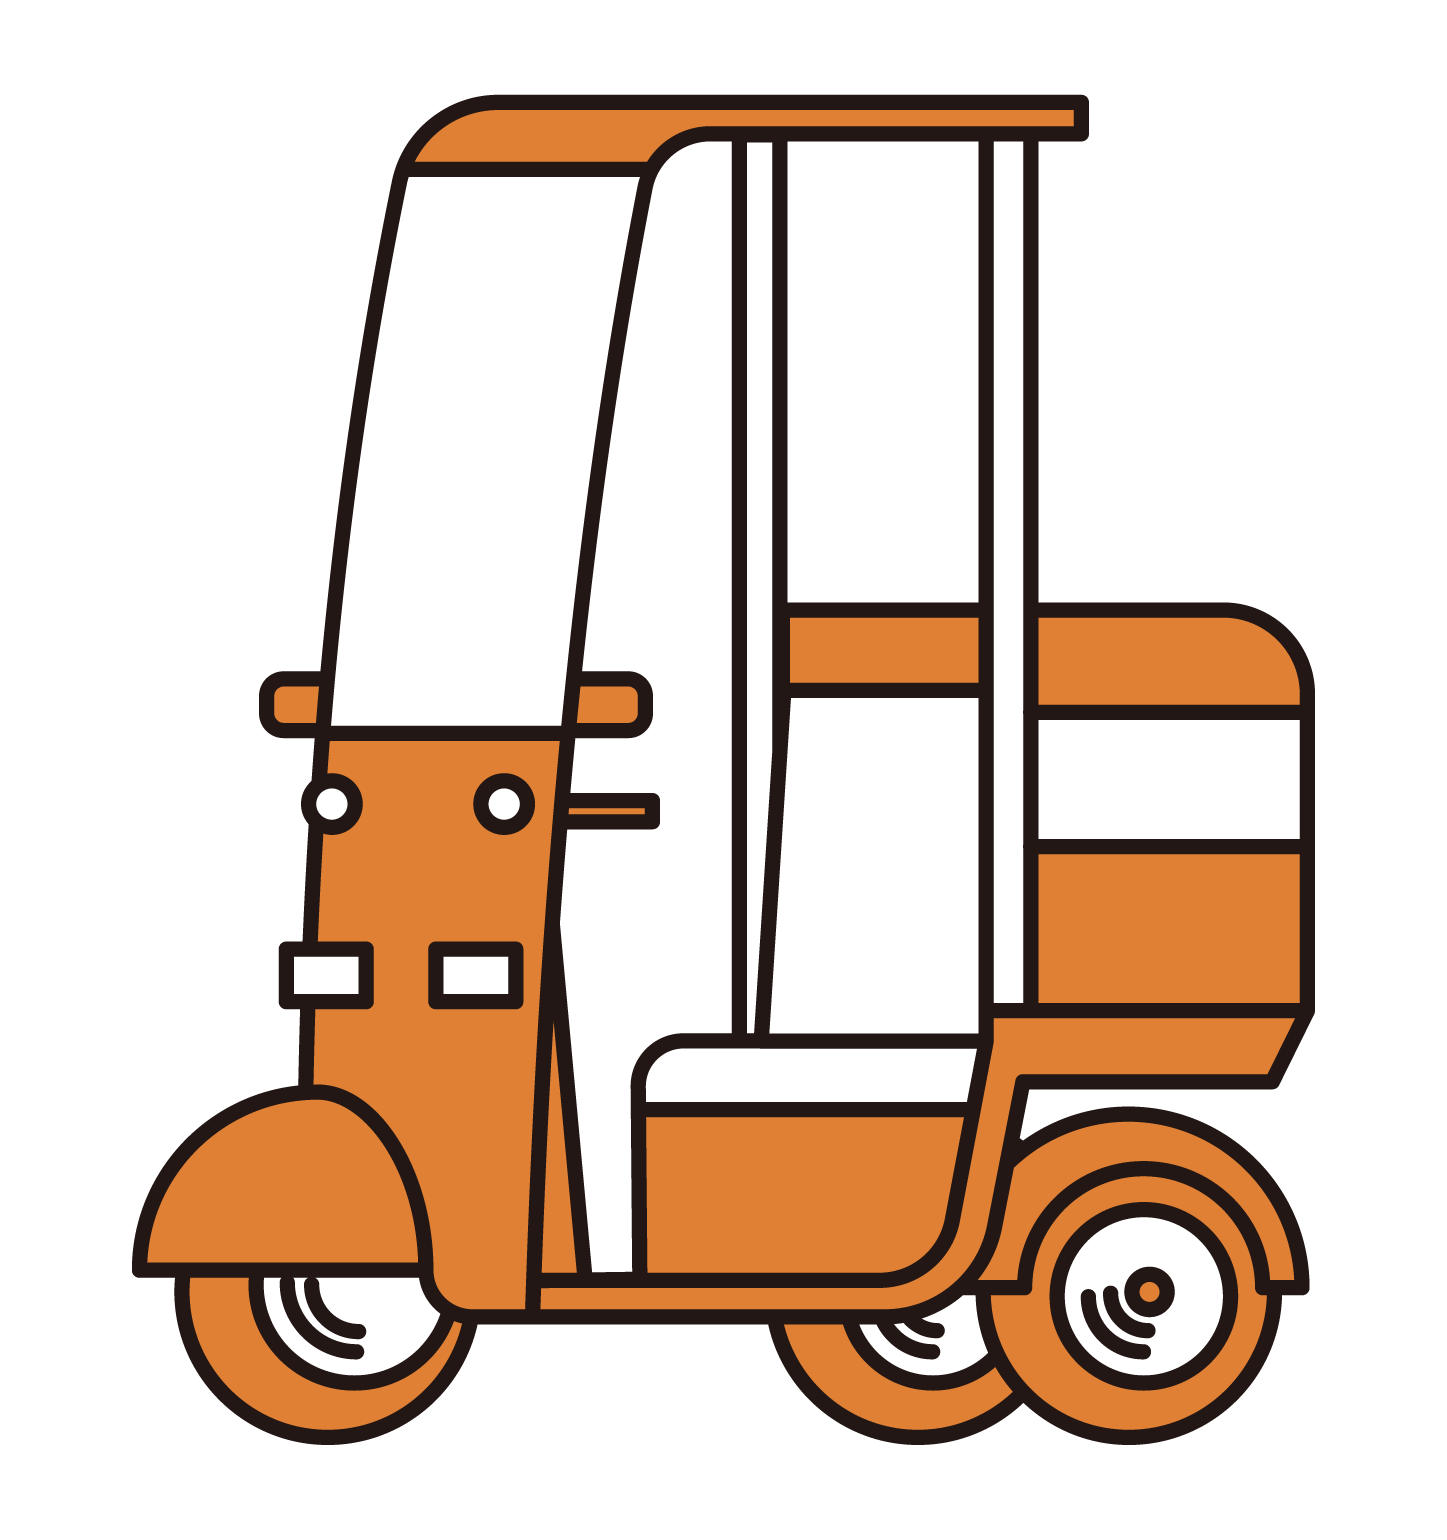 Illustration of a motorcycle for food delivery